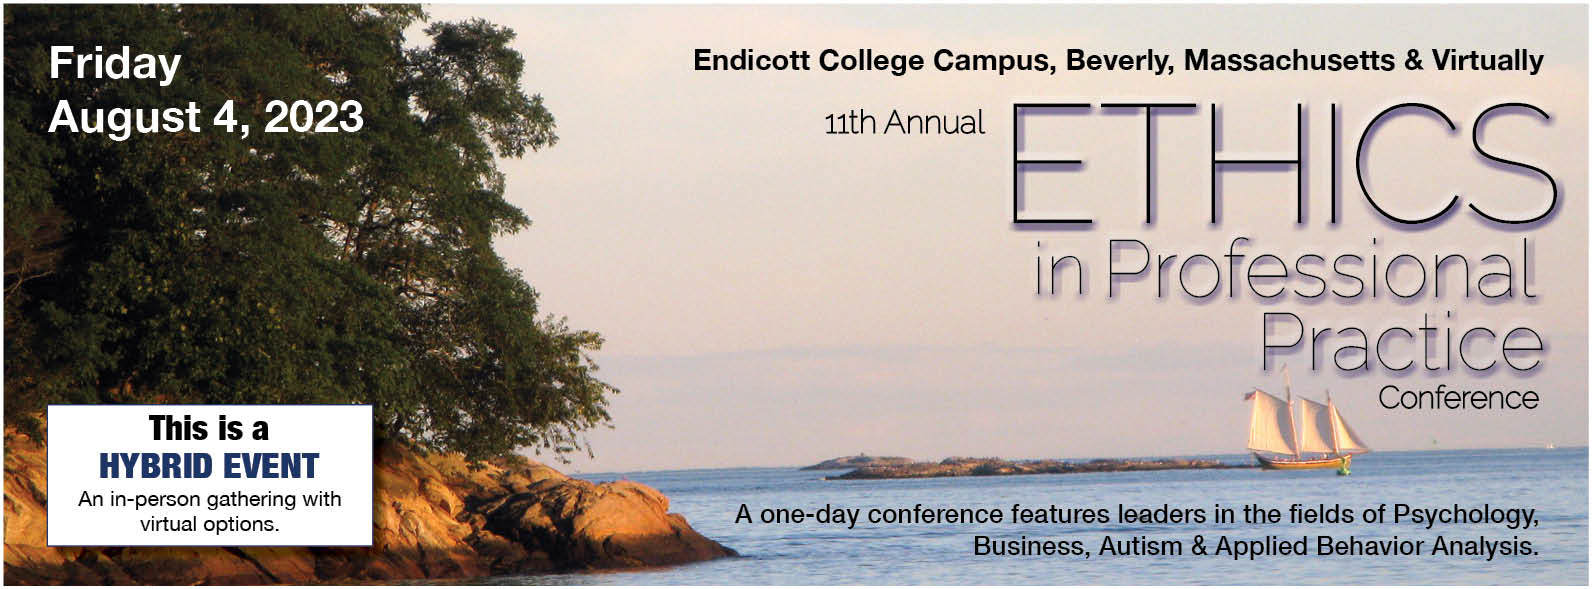 11th Annual ETHICS in Professional Practice Conference